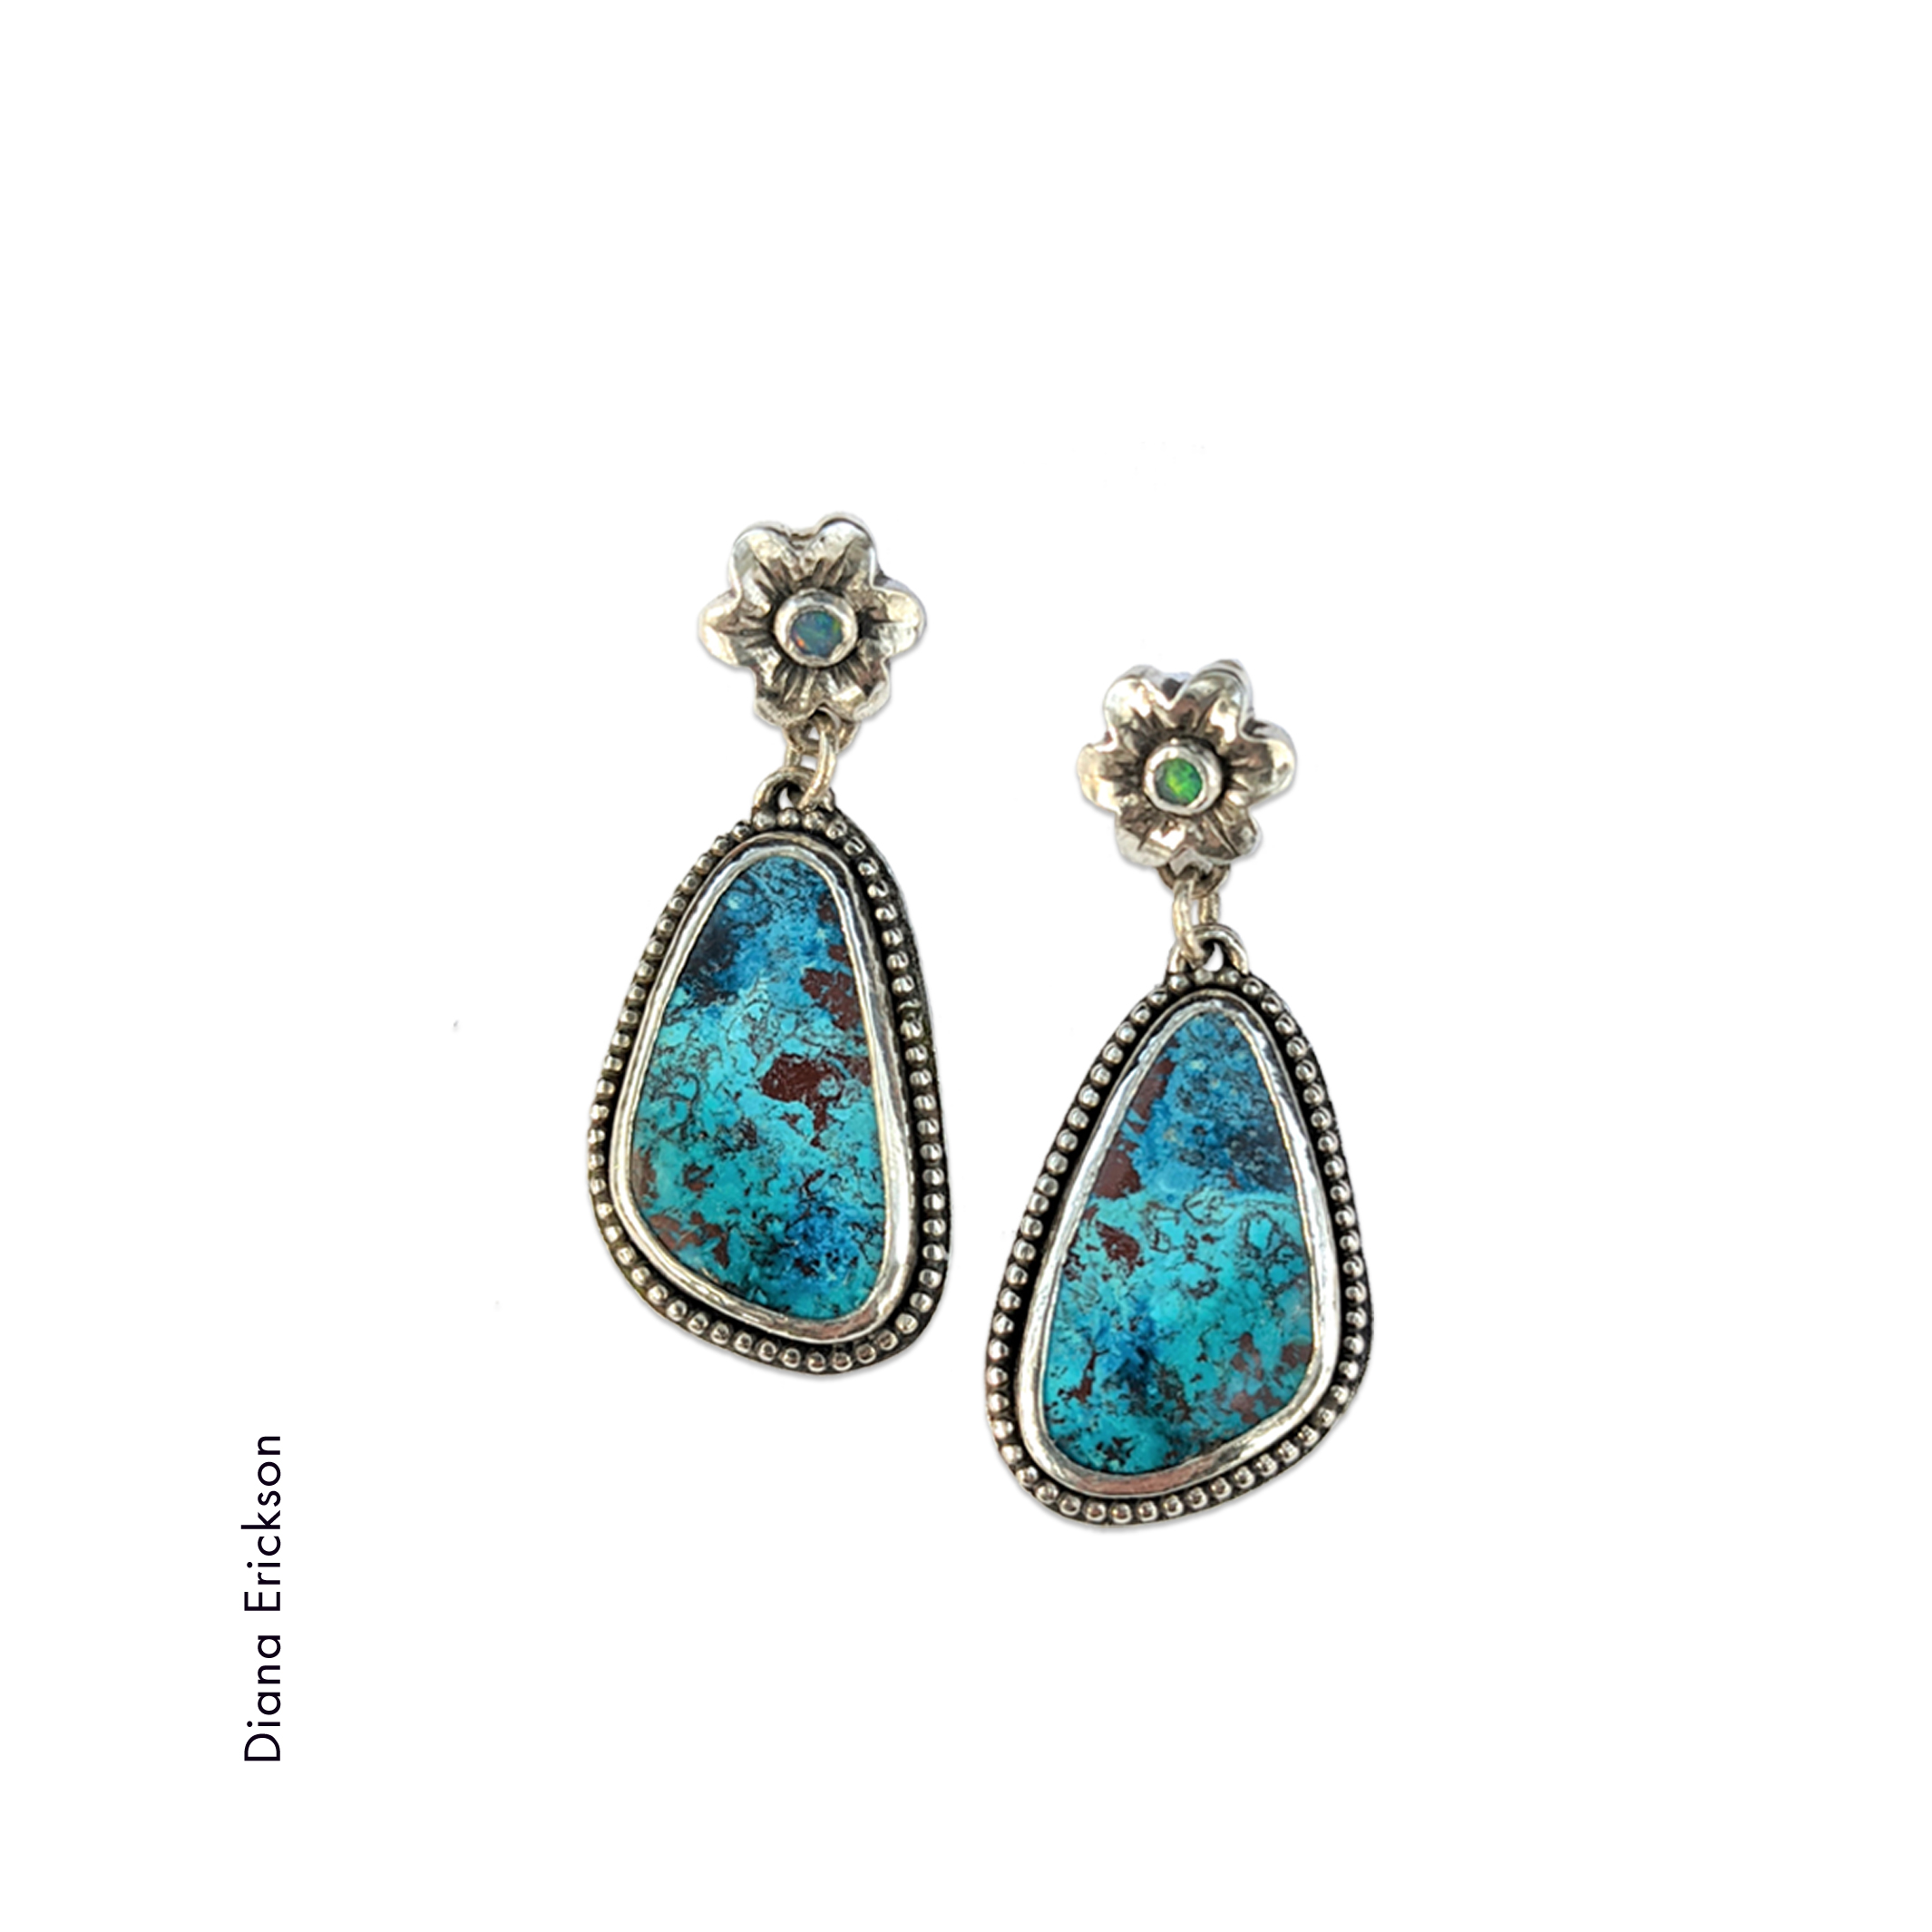 A pair of earrings with triangular deep blue turquoise stone with beaded sterling silver bezel and a silver flower by Diana Erickson